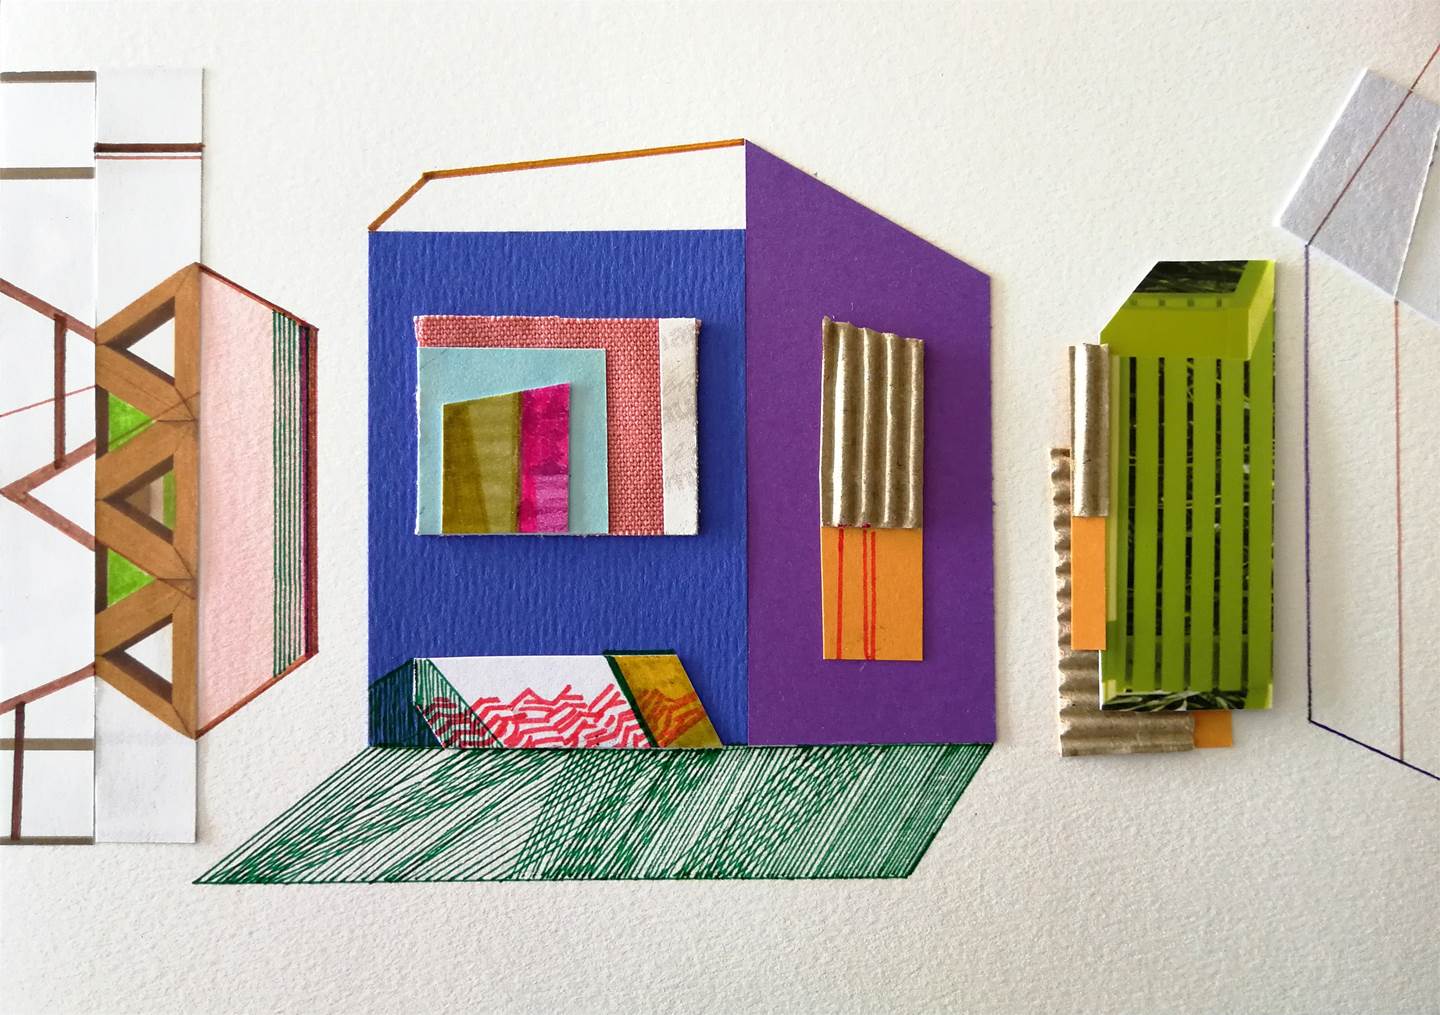 Moradia de sonho #23, original Architecture Mixed Technique Drawing and Illustration by Ana Pais Oliveira